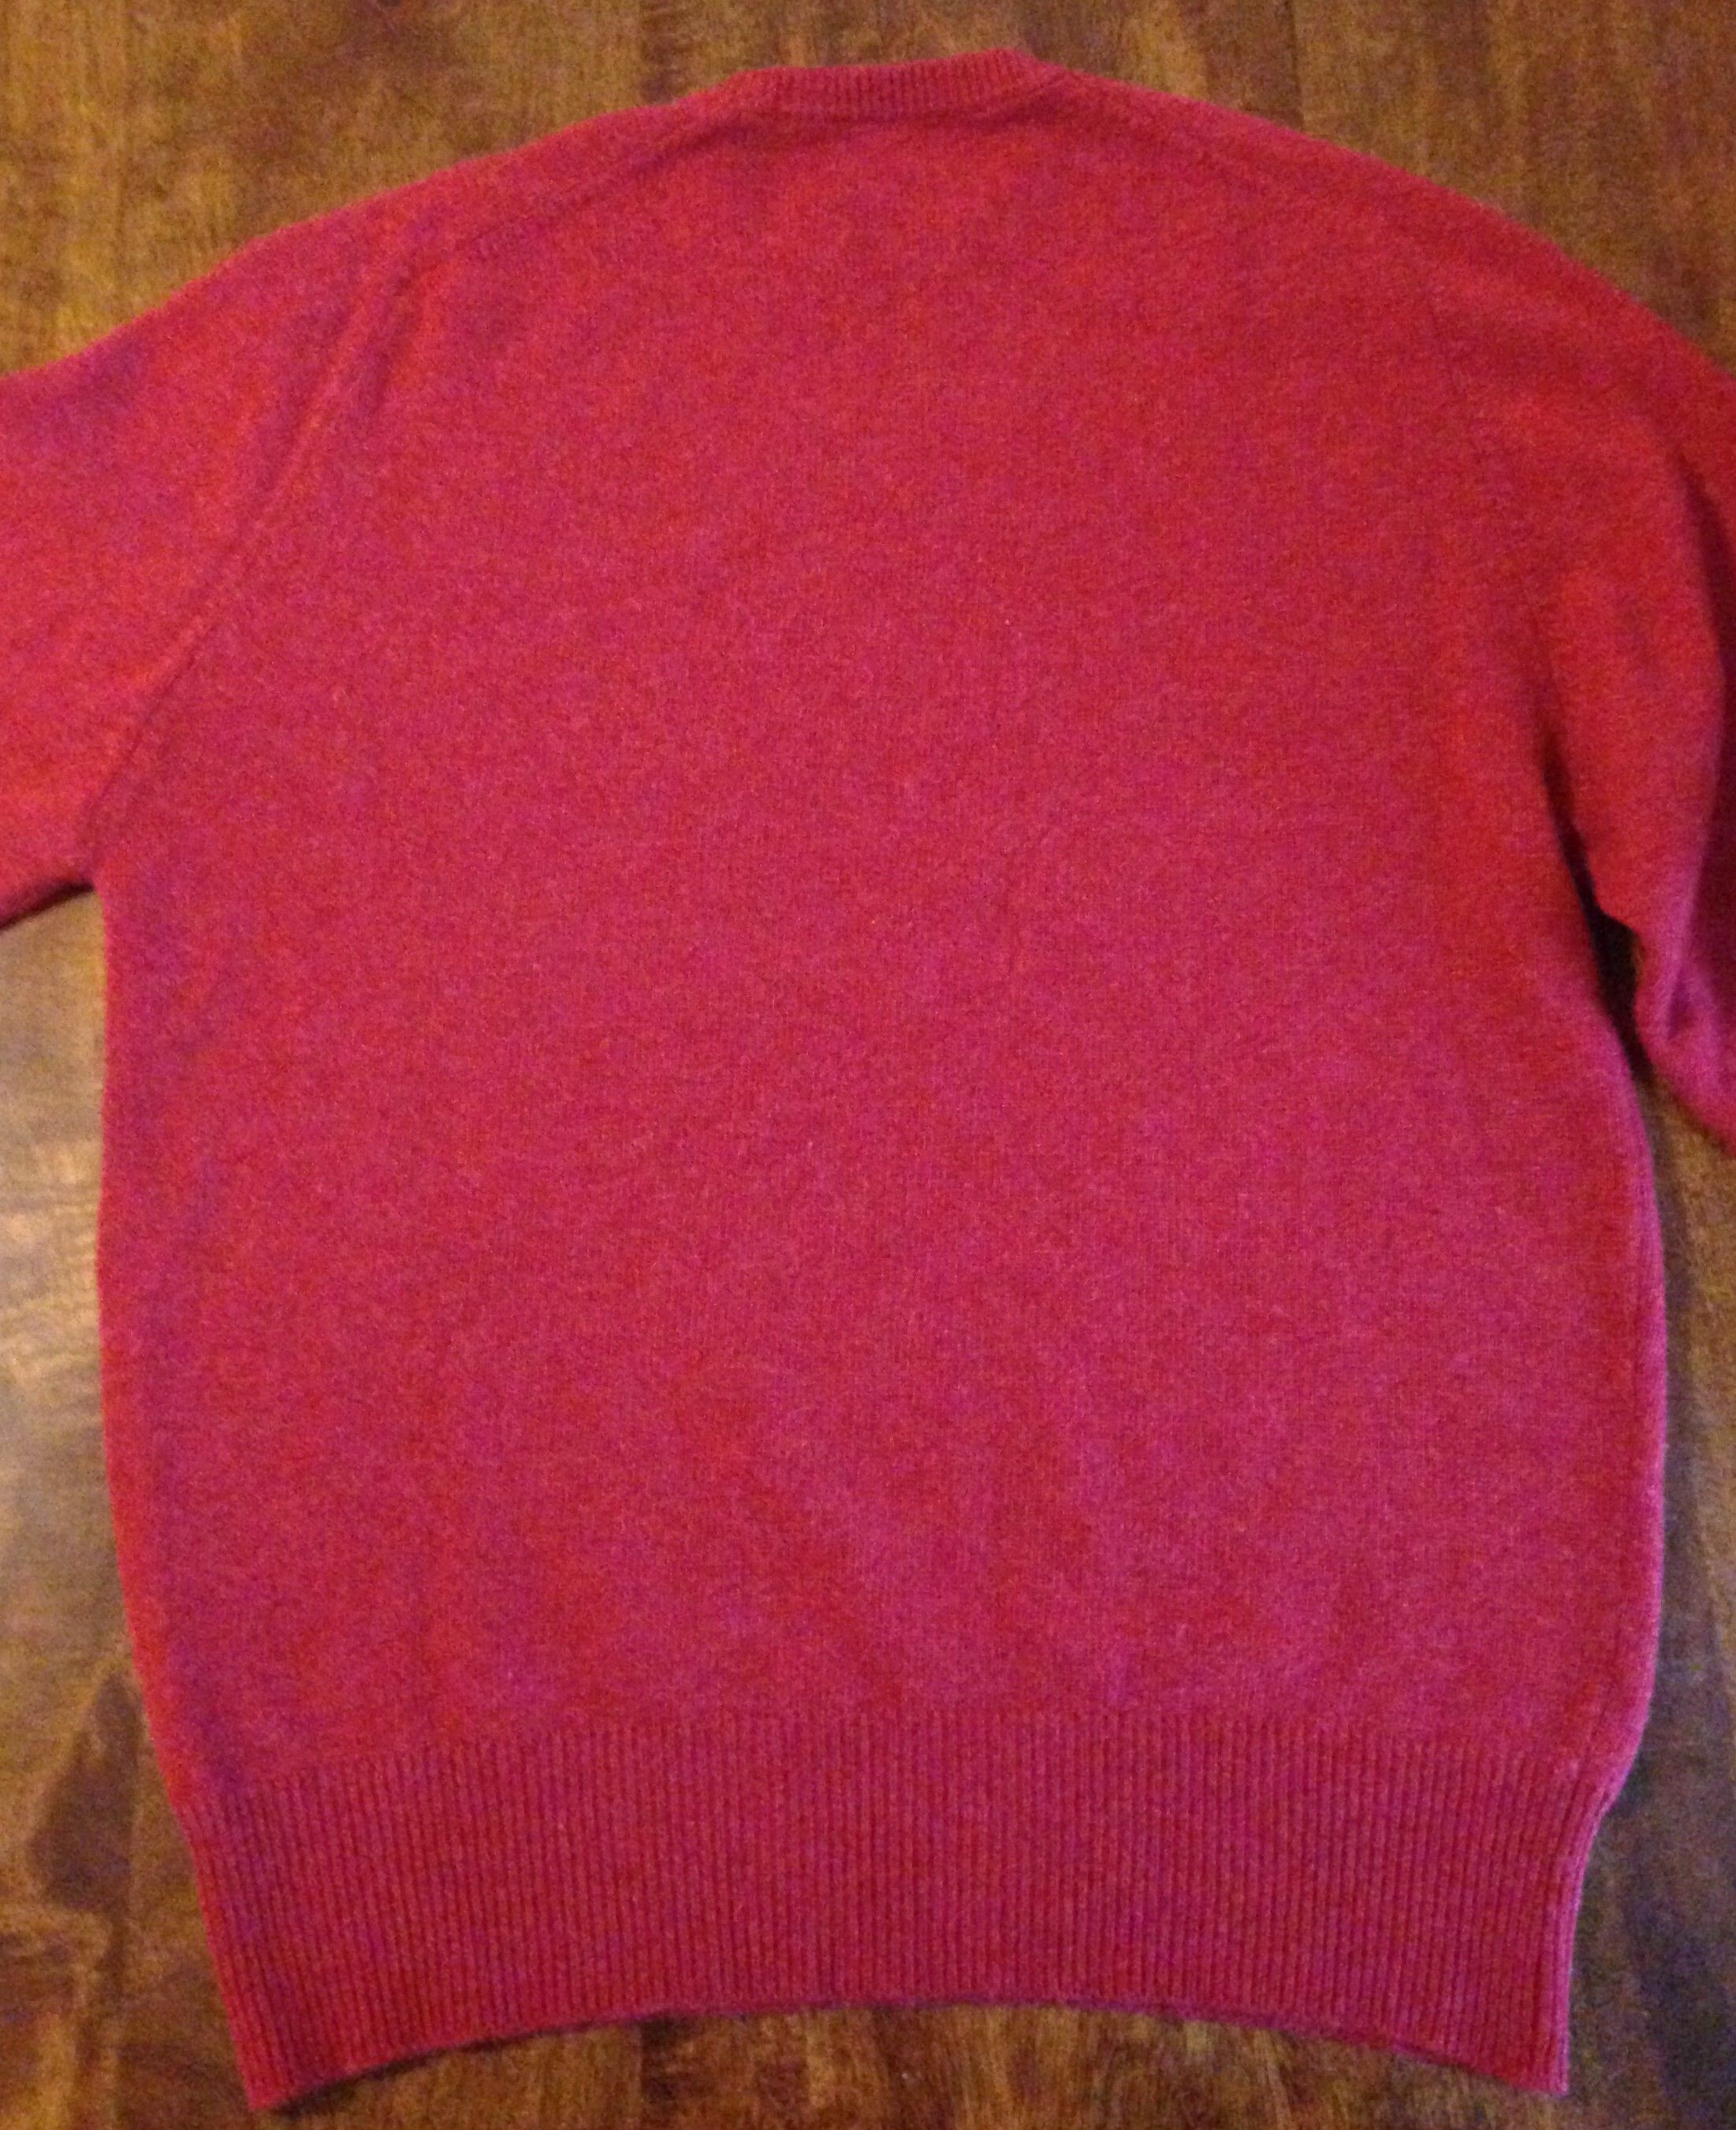 Turnbull & Asser Red Cashmere Sweater Size US L / EU 52-54 / 3 - 6 Preview